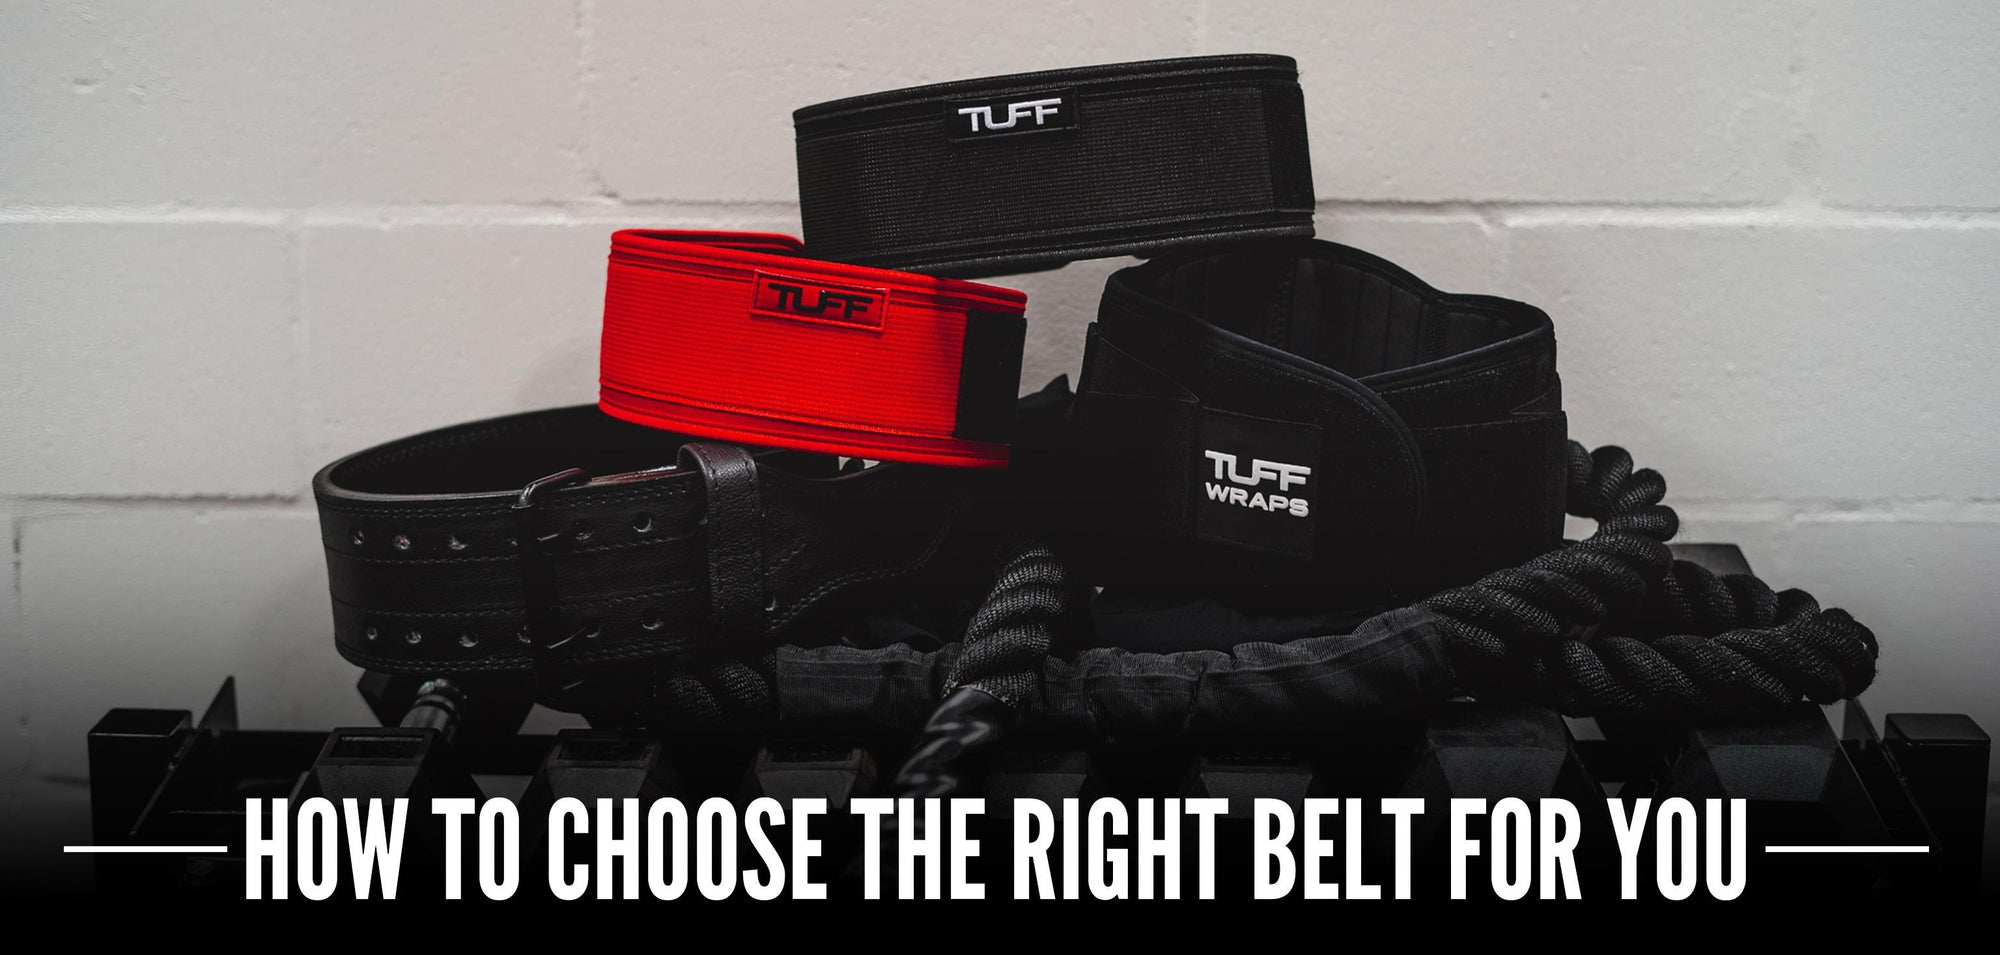 Weight Lifting Belts - How To Choose The Right One For You